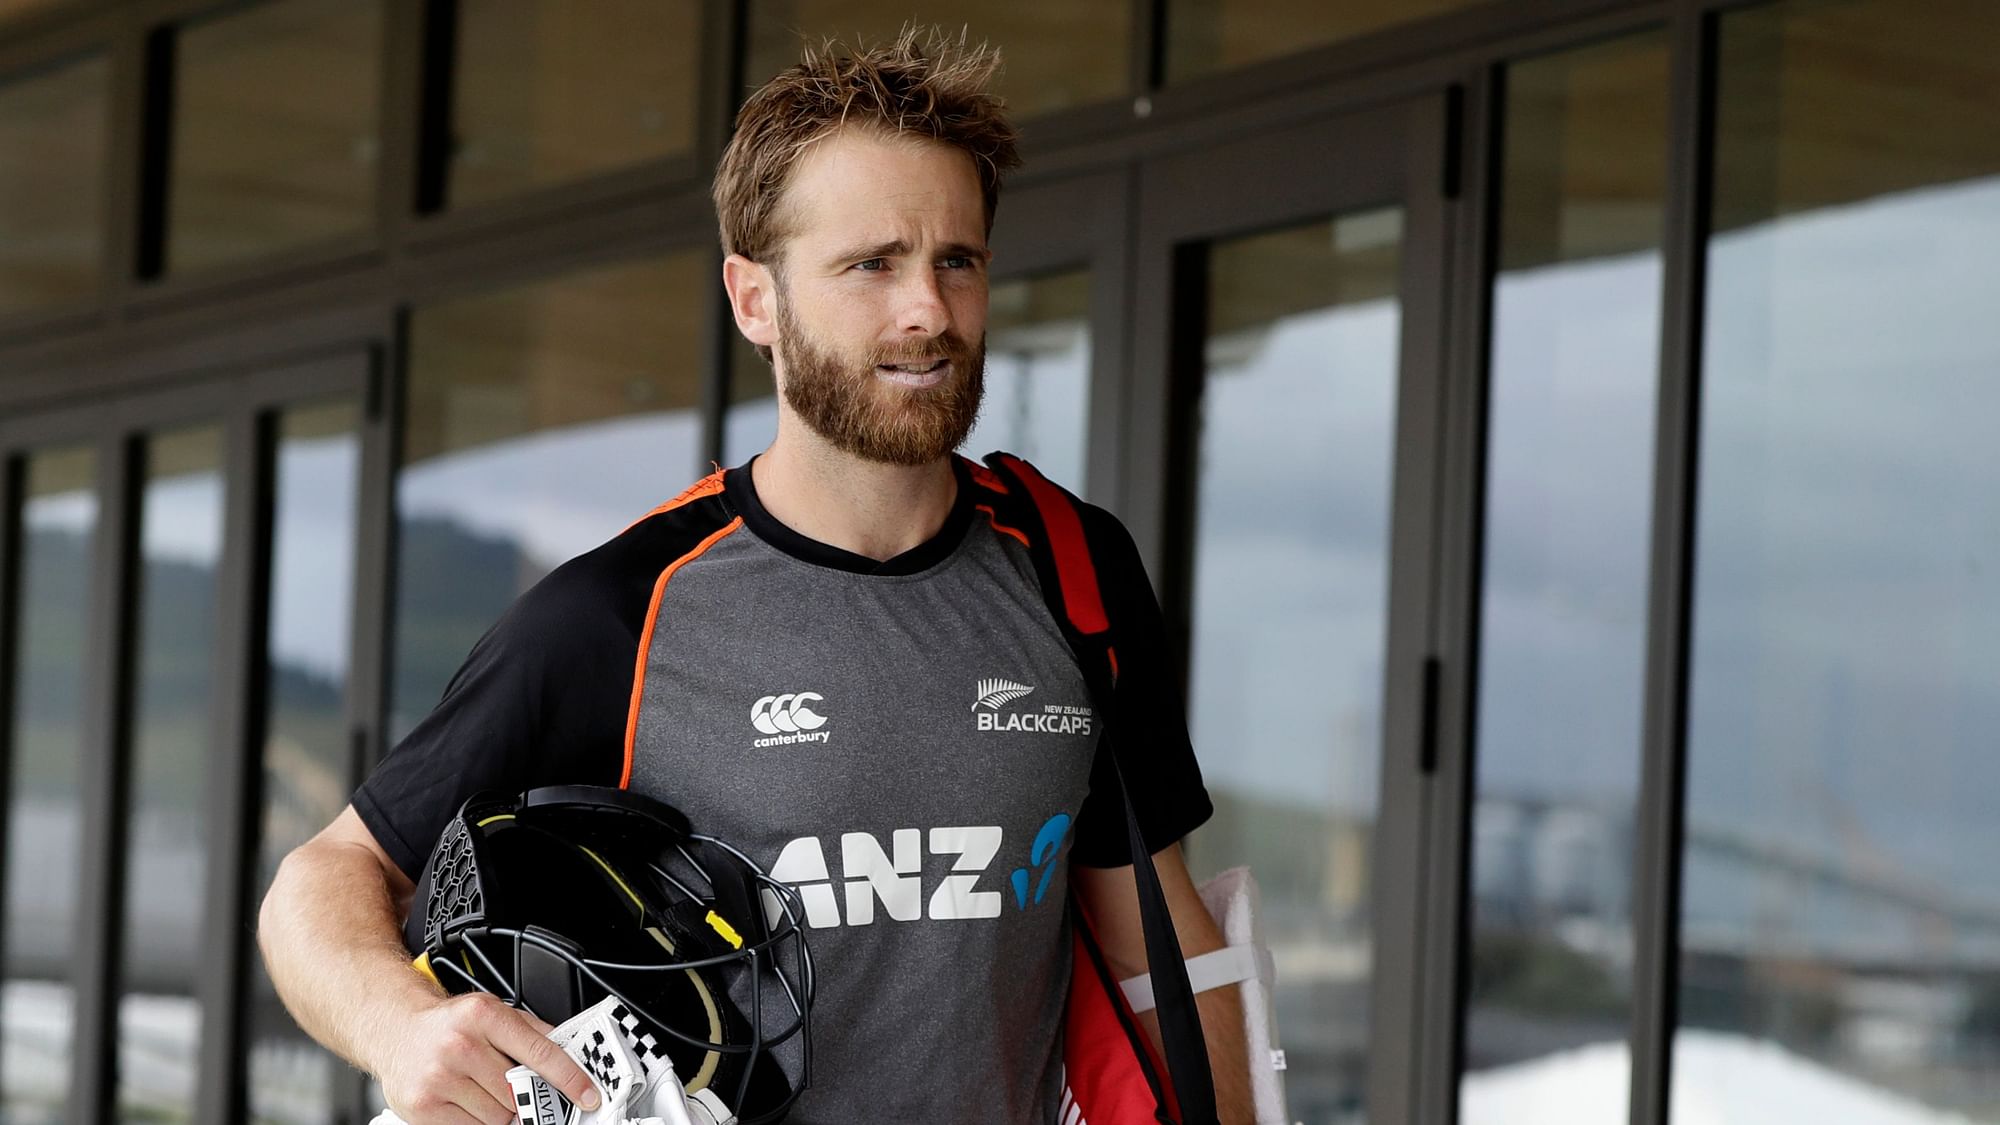 New Zealand skipper Kane Williamson and batsman Henry Nicholls were on Wednesday, 1 January sent back to their hotel from training after they were found to be suffering from “flu-like symptoms” two days ahead of their third Test against Australia.